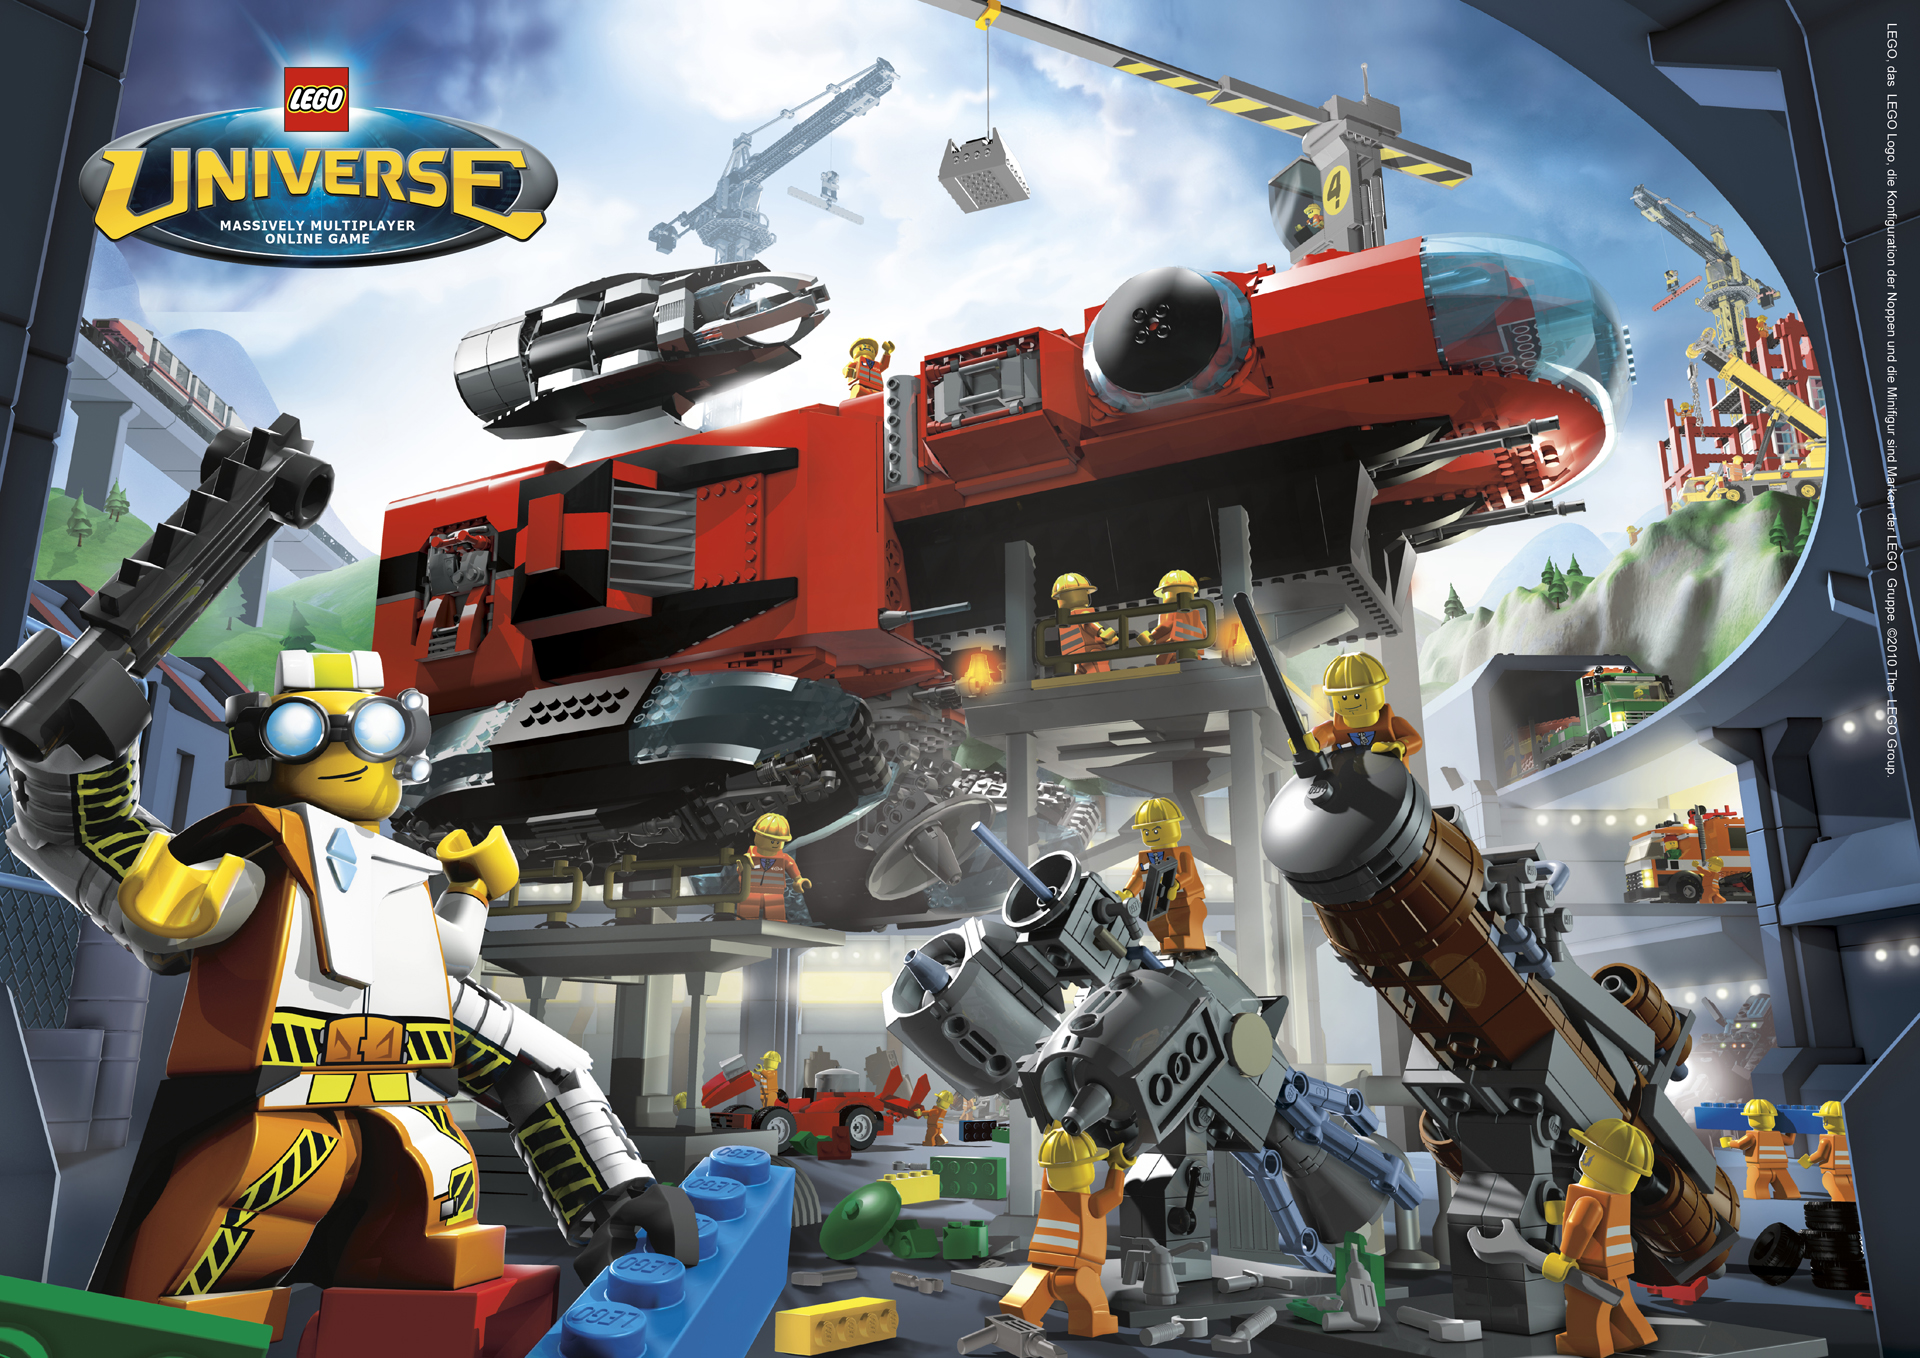 LEGO Universe Goes to